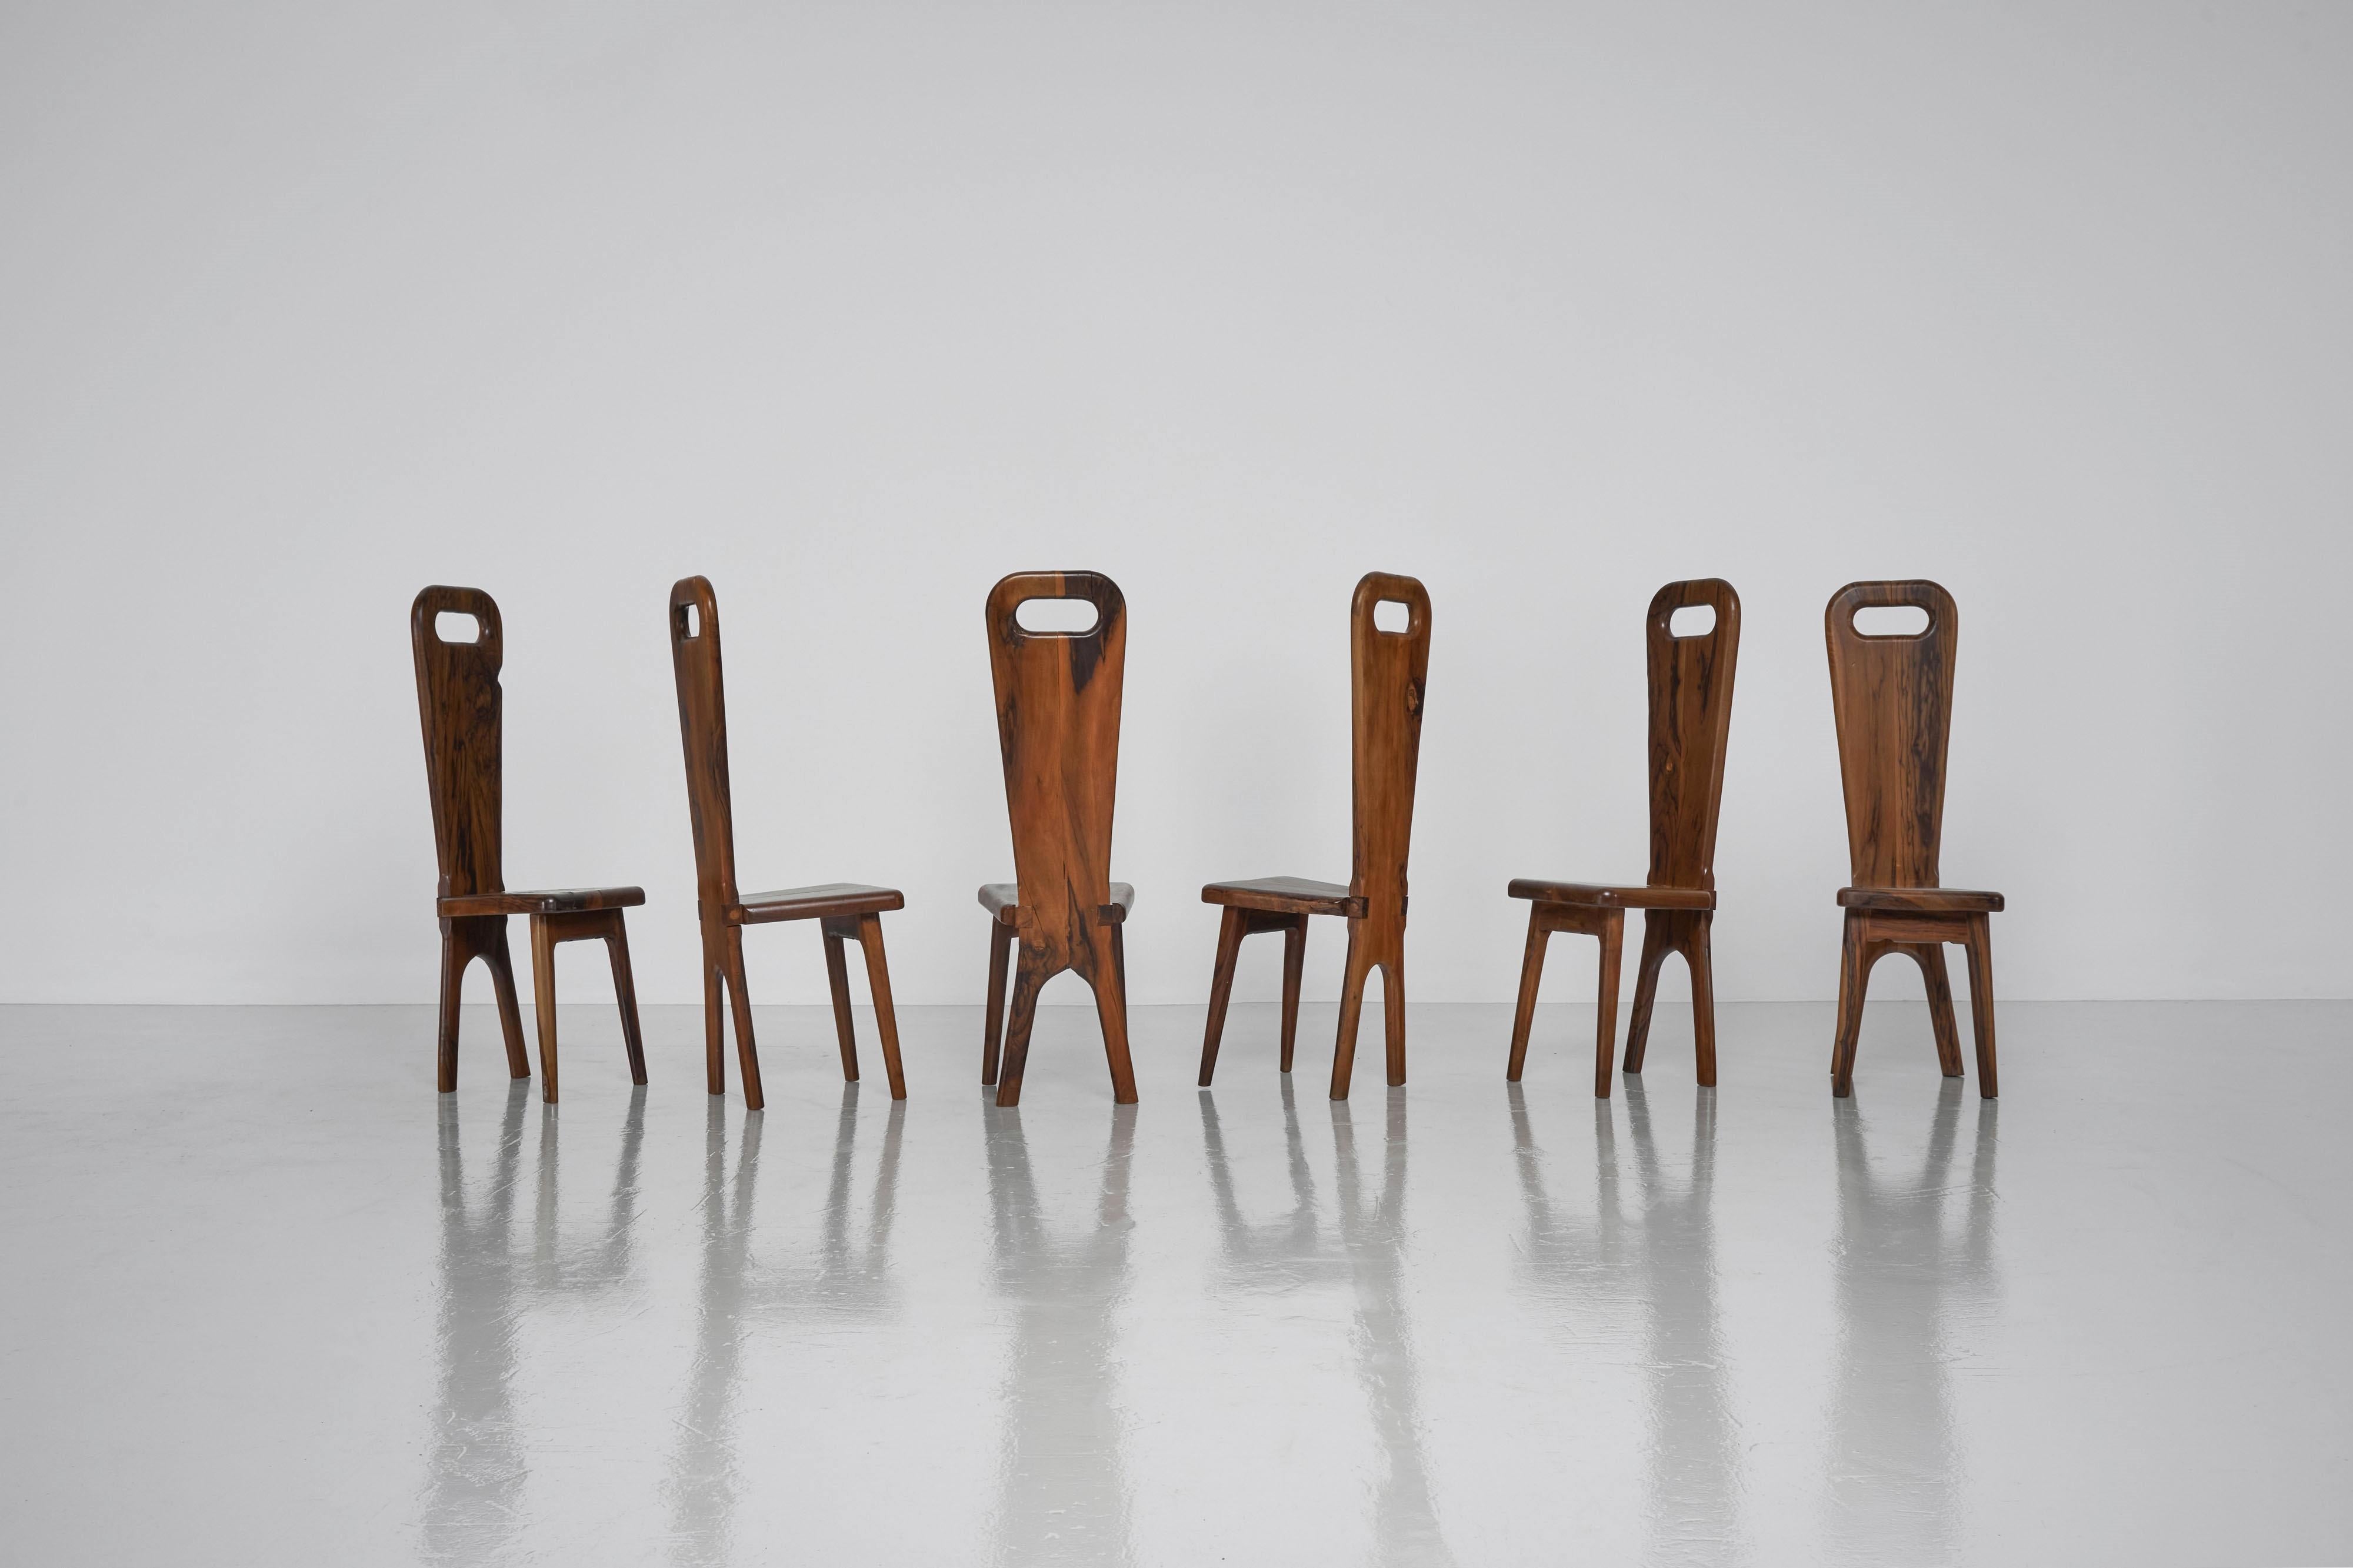 A unique set of 6 high back chairs made by an unknown artist from the south of France made in the 1960s. These chairs fit all the requirements for their brutalist interpretation of the artist. Rough wooden materials, elegantly crafted into an